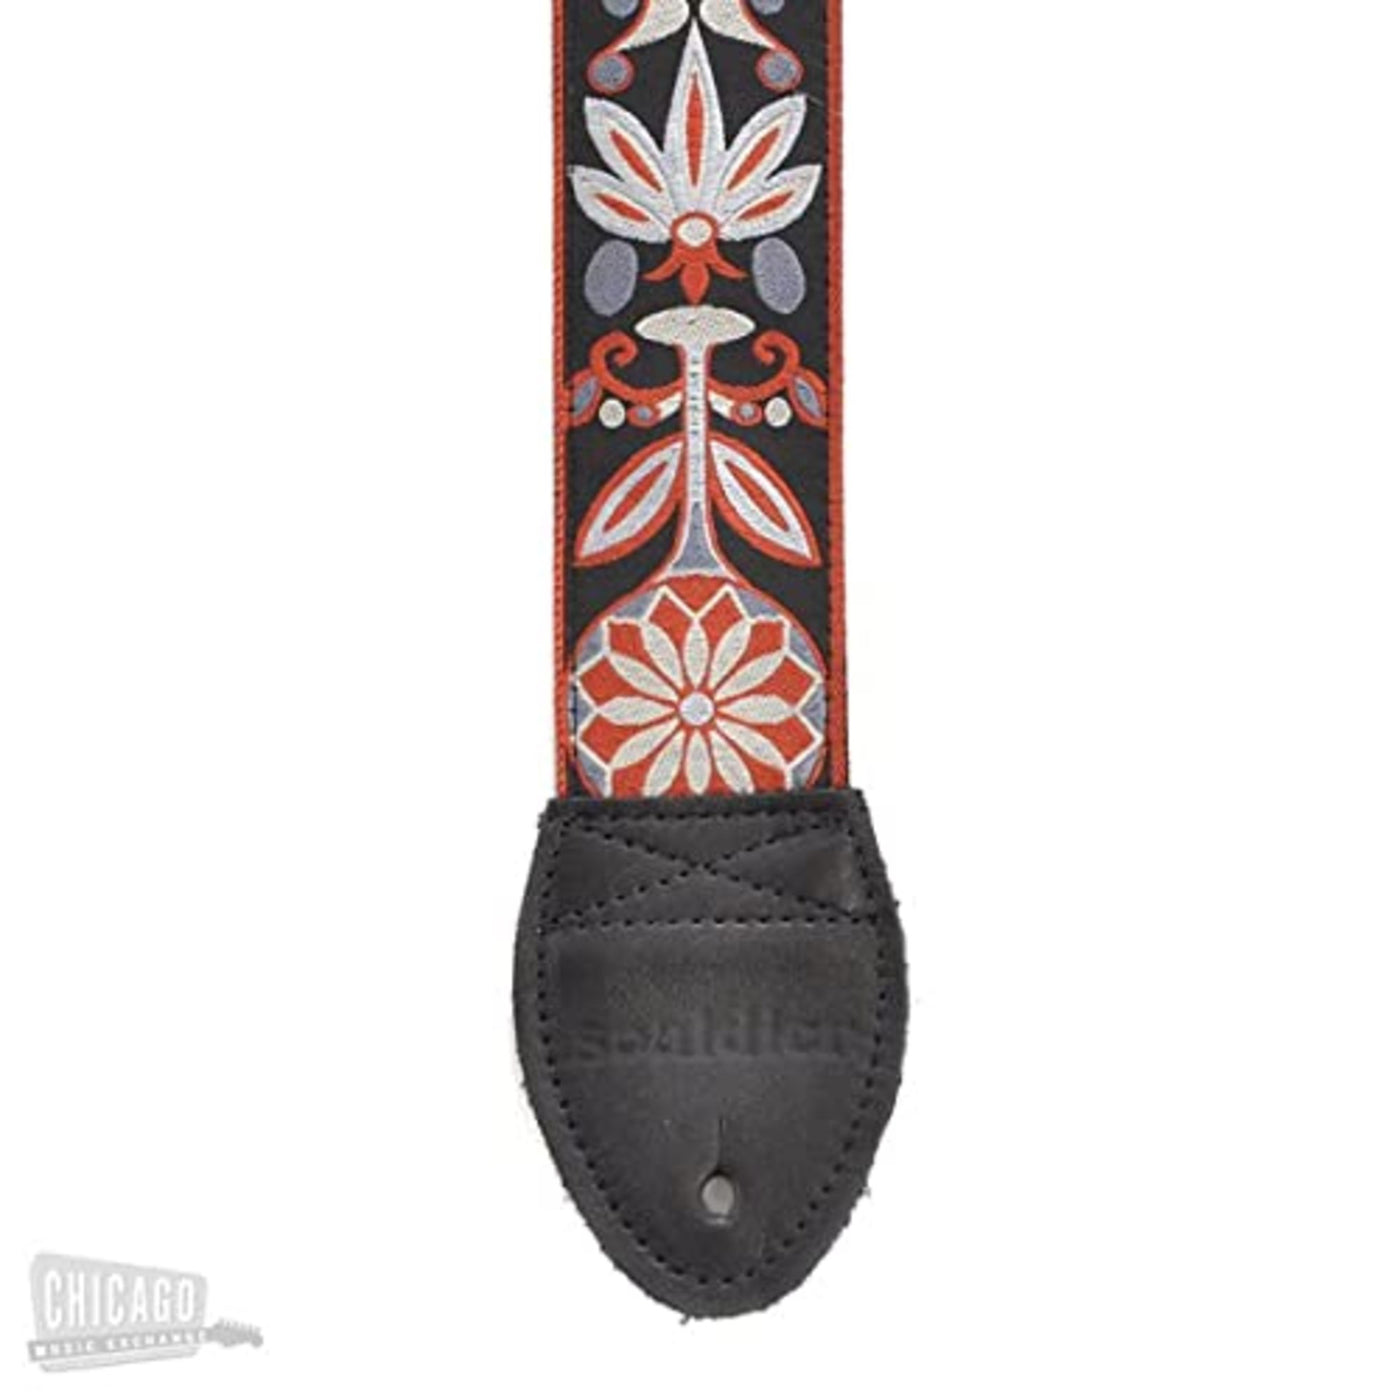 Souldier GS0082BK02BK - Handmade Seatbelt Guitar Strap for Bass, Electric or Acoustic Guitar, 2 Inches Wide and Adjustable Length from 30" to 63"  Made in the USA, Daisy, Grey